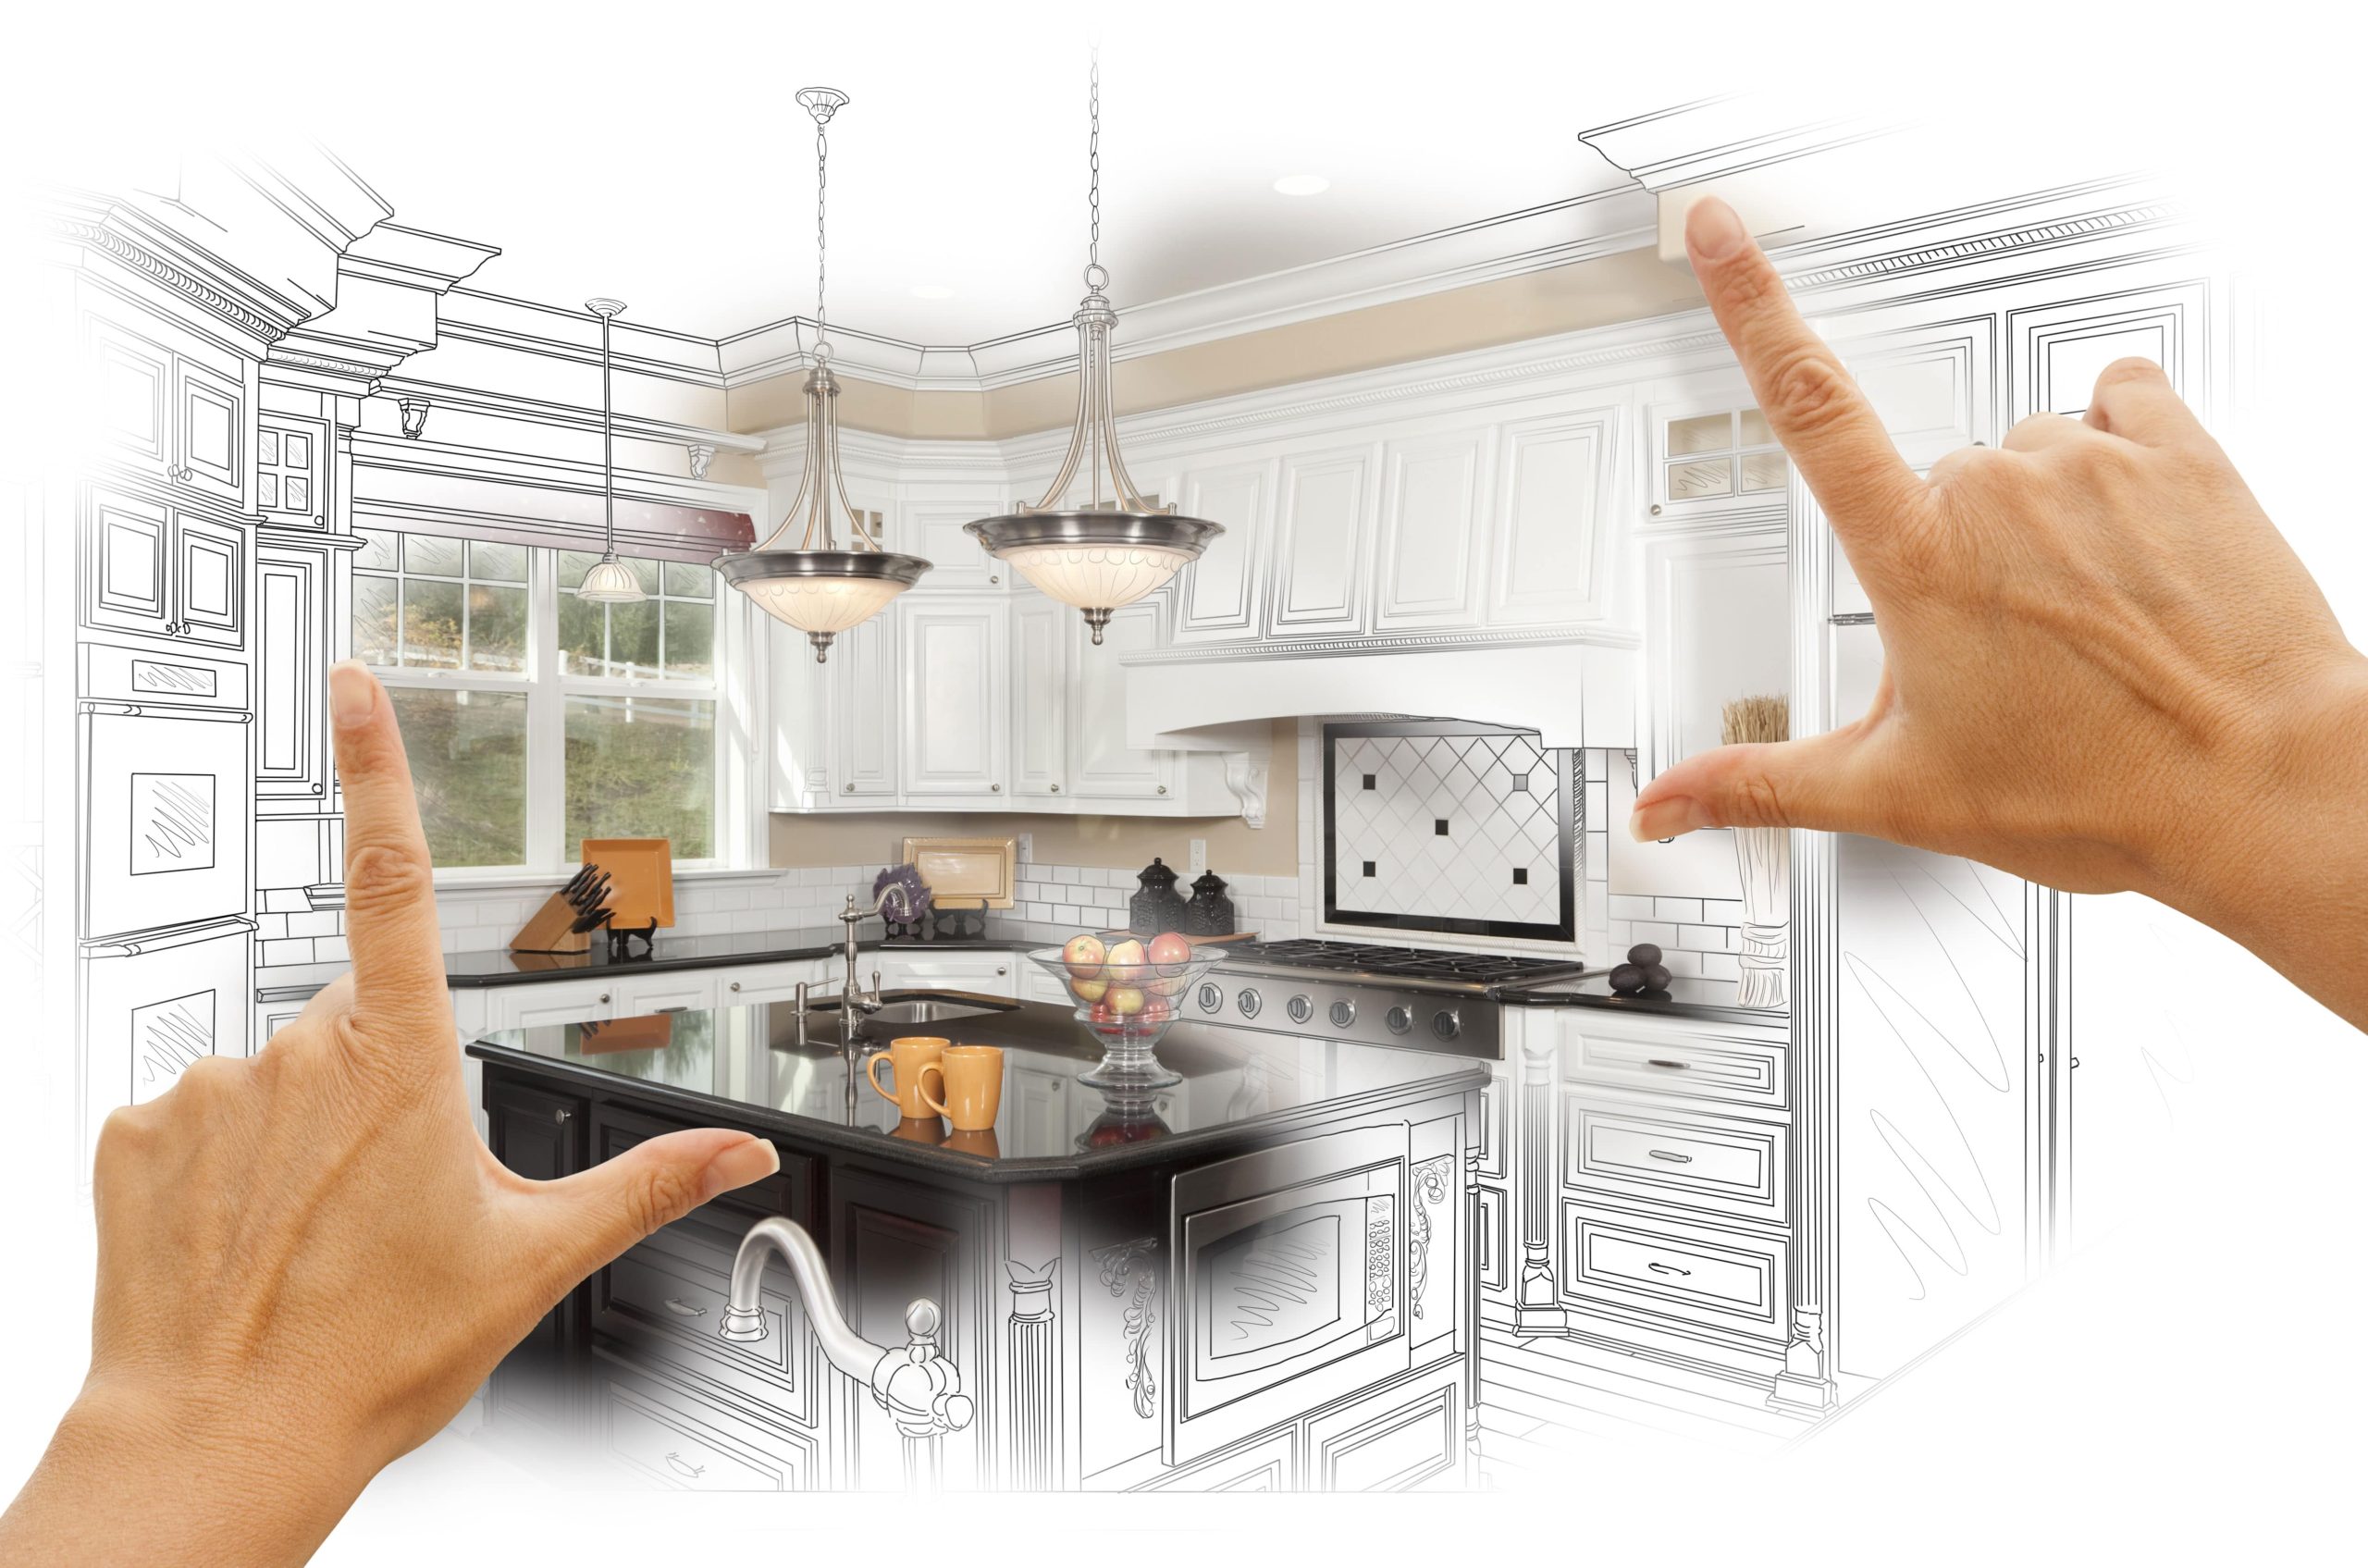 Our specialists in Ashburn, Virginia help you create a kitchen that reflects your personal style and design.